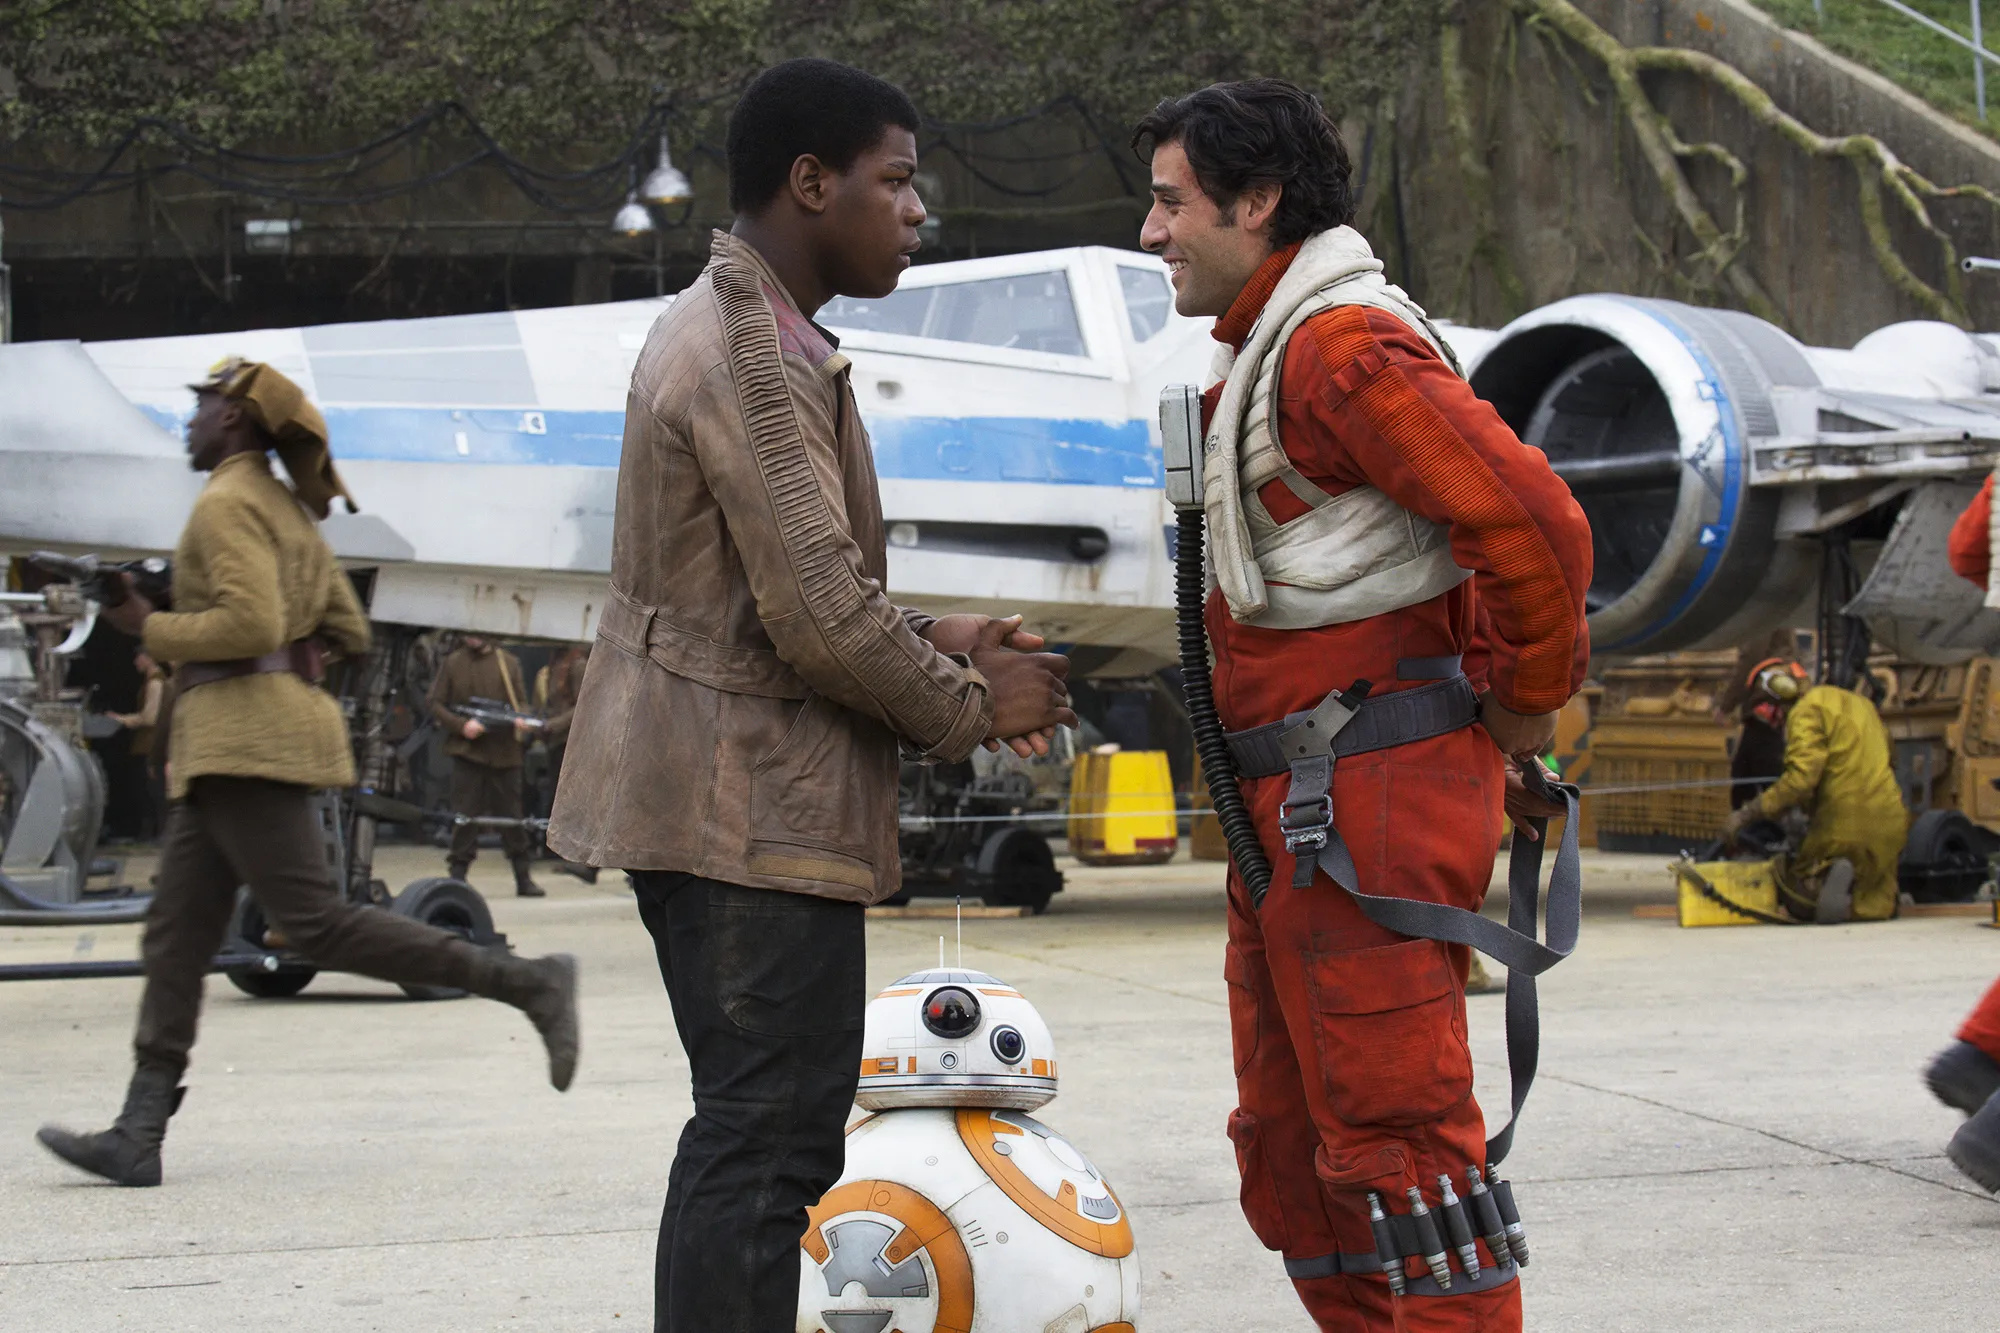 Poe Dameron, The Force Awakens, In-depth articles, Pictures and videos, 2000x1340 HD Desktop